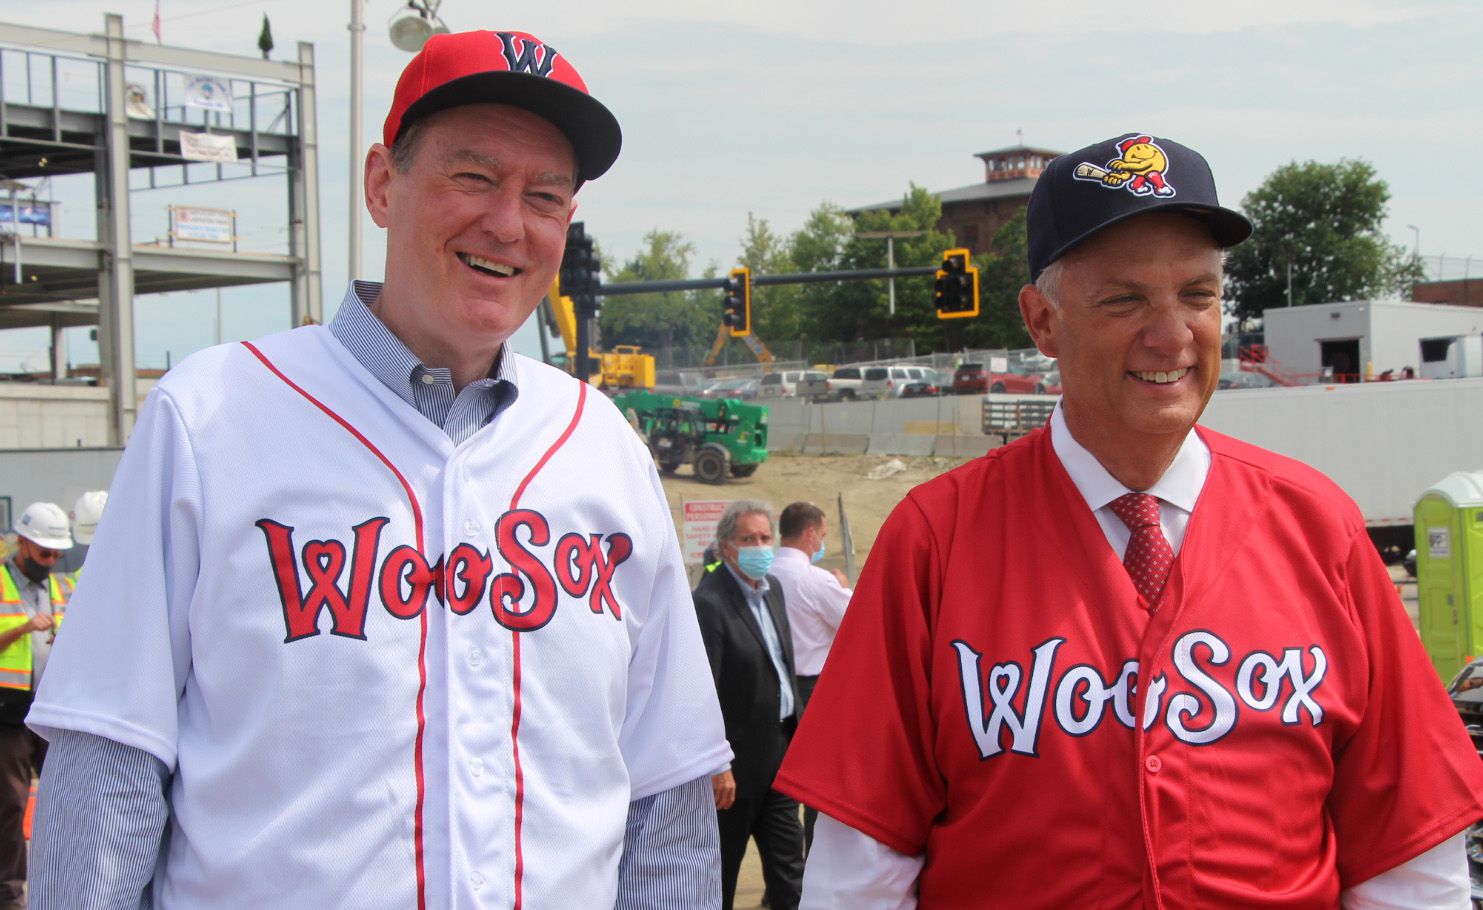 Worcester Red Sox unveil player jerseys and caps